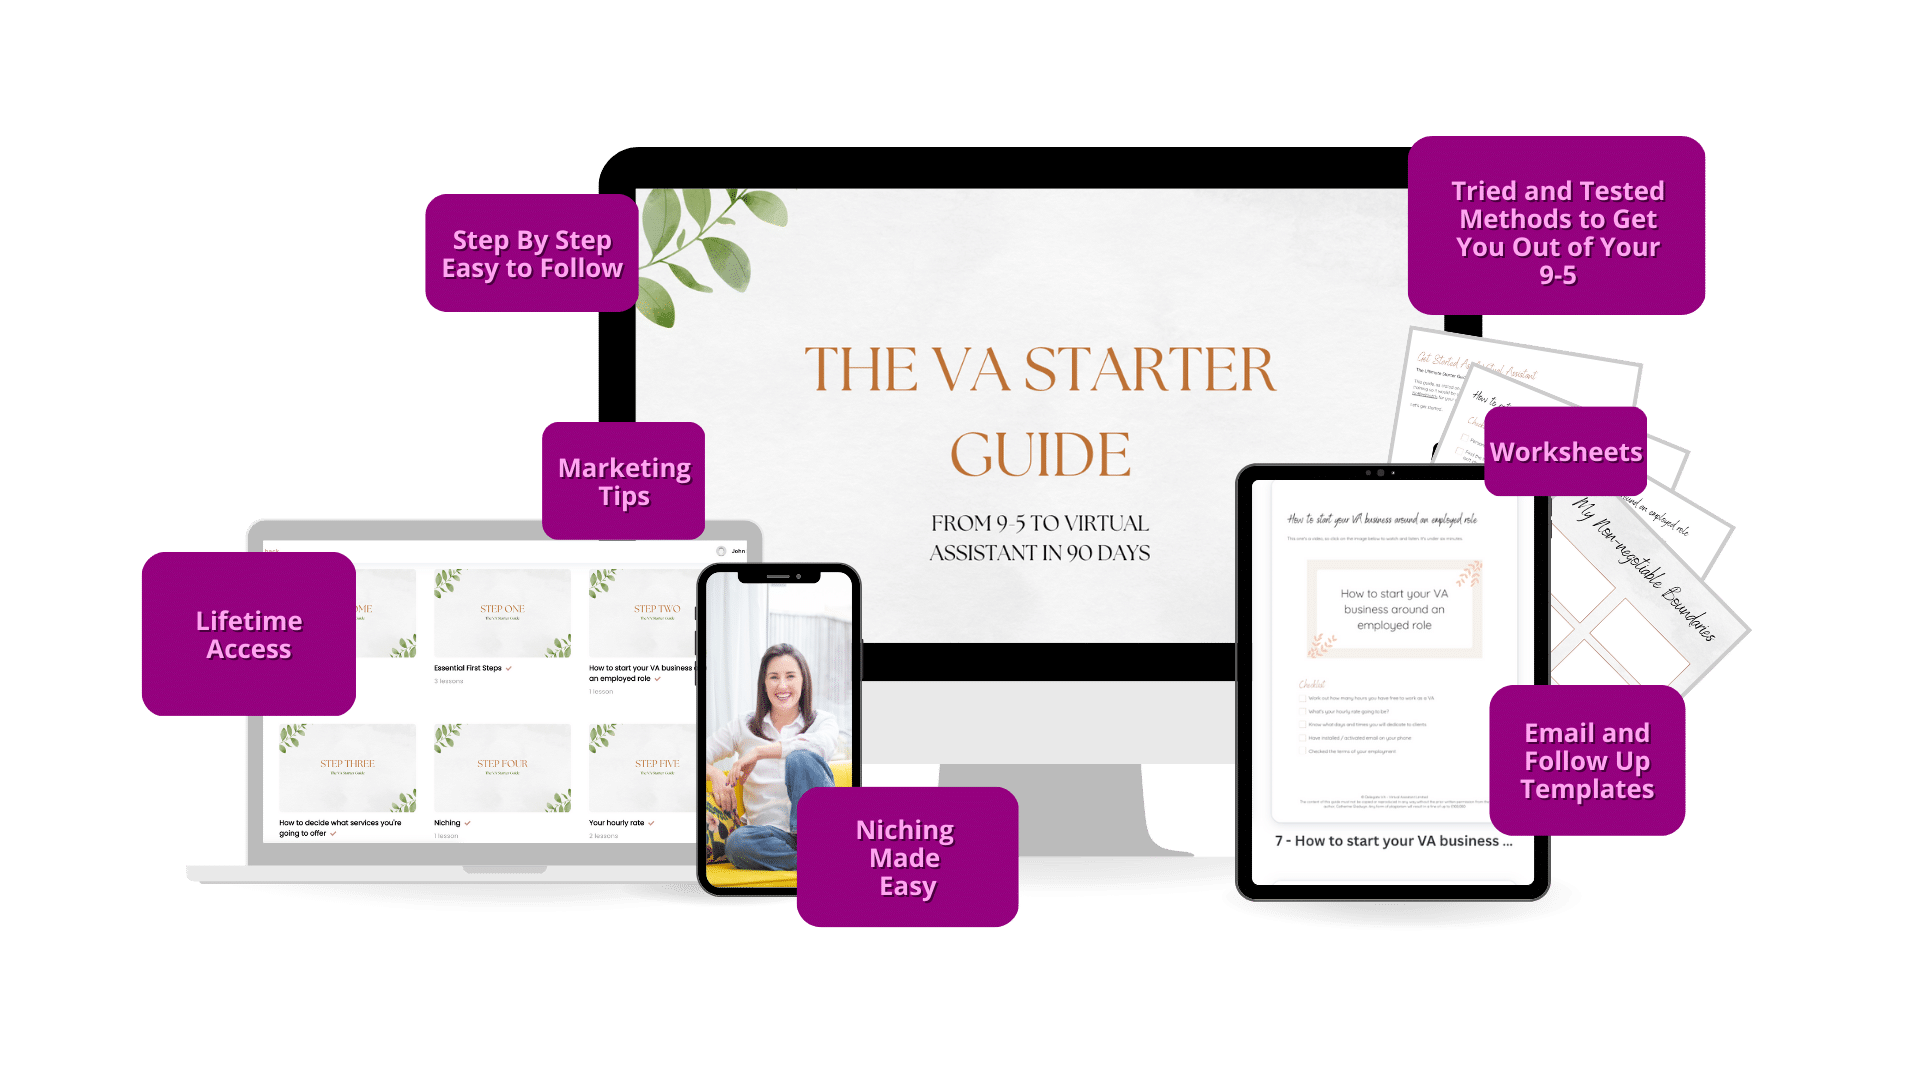 How to be a Virtual Assistant. The VA Starter Guide from Catherine Gladwyn